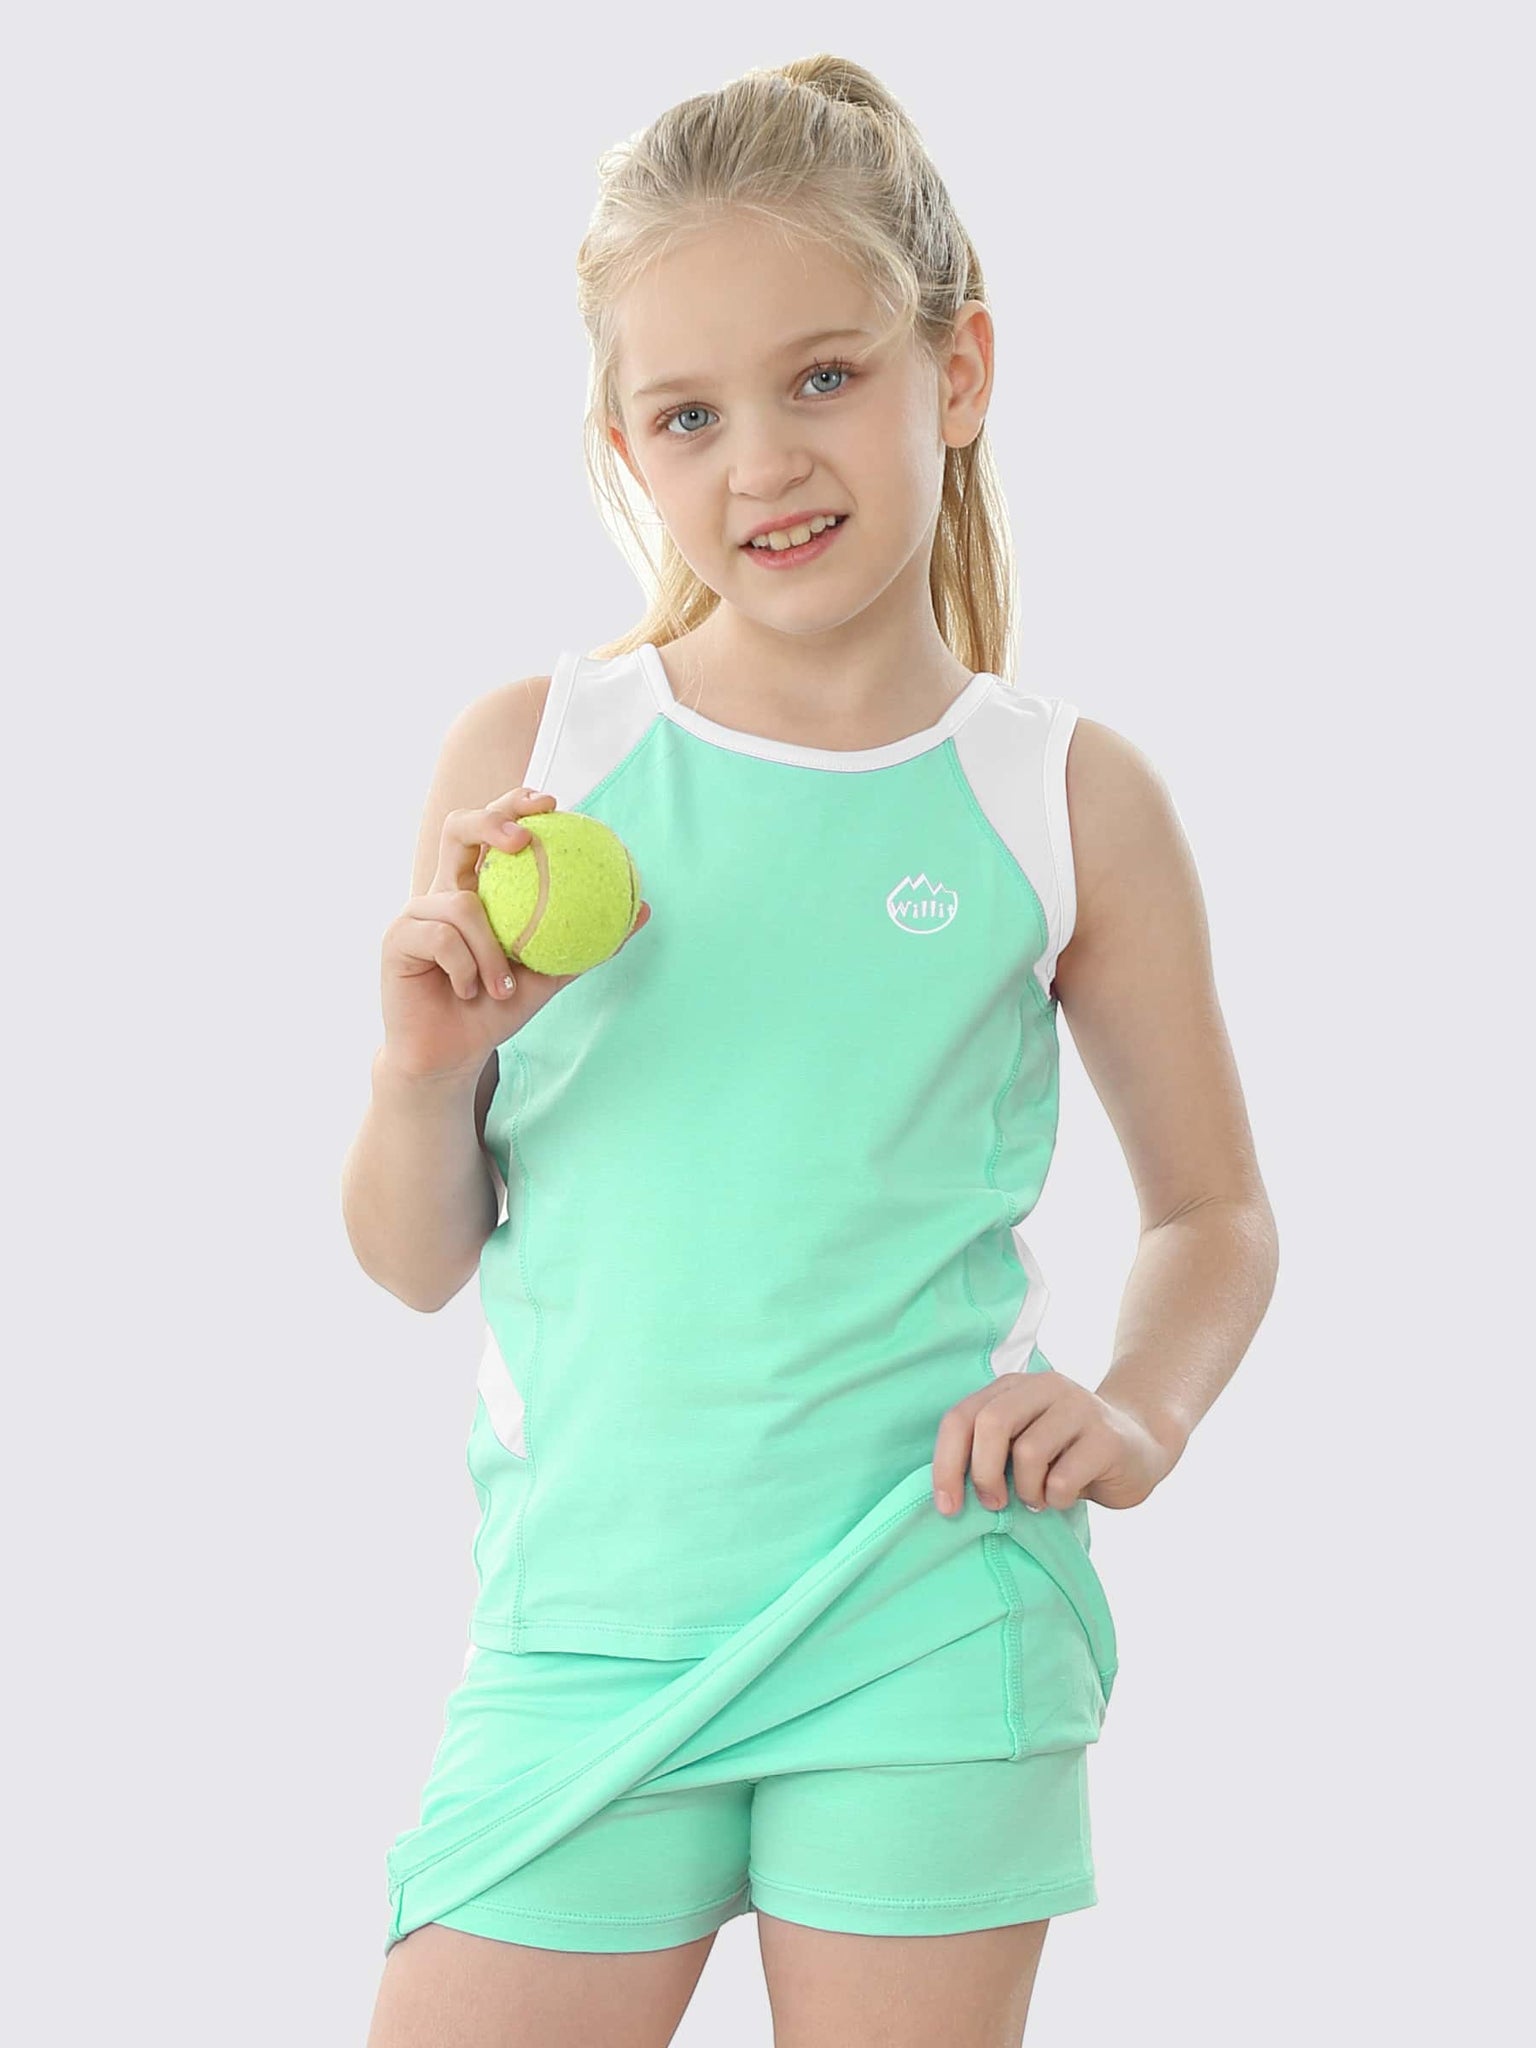 Willit Girls' Tennis Outfit_Green_model3